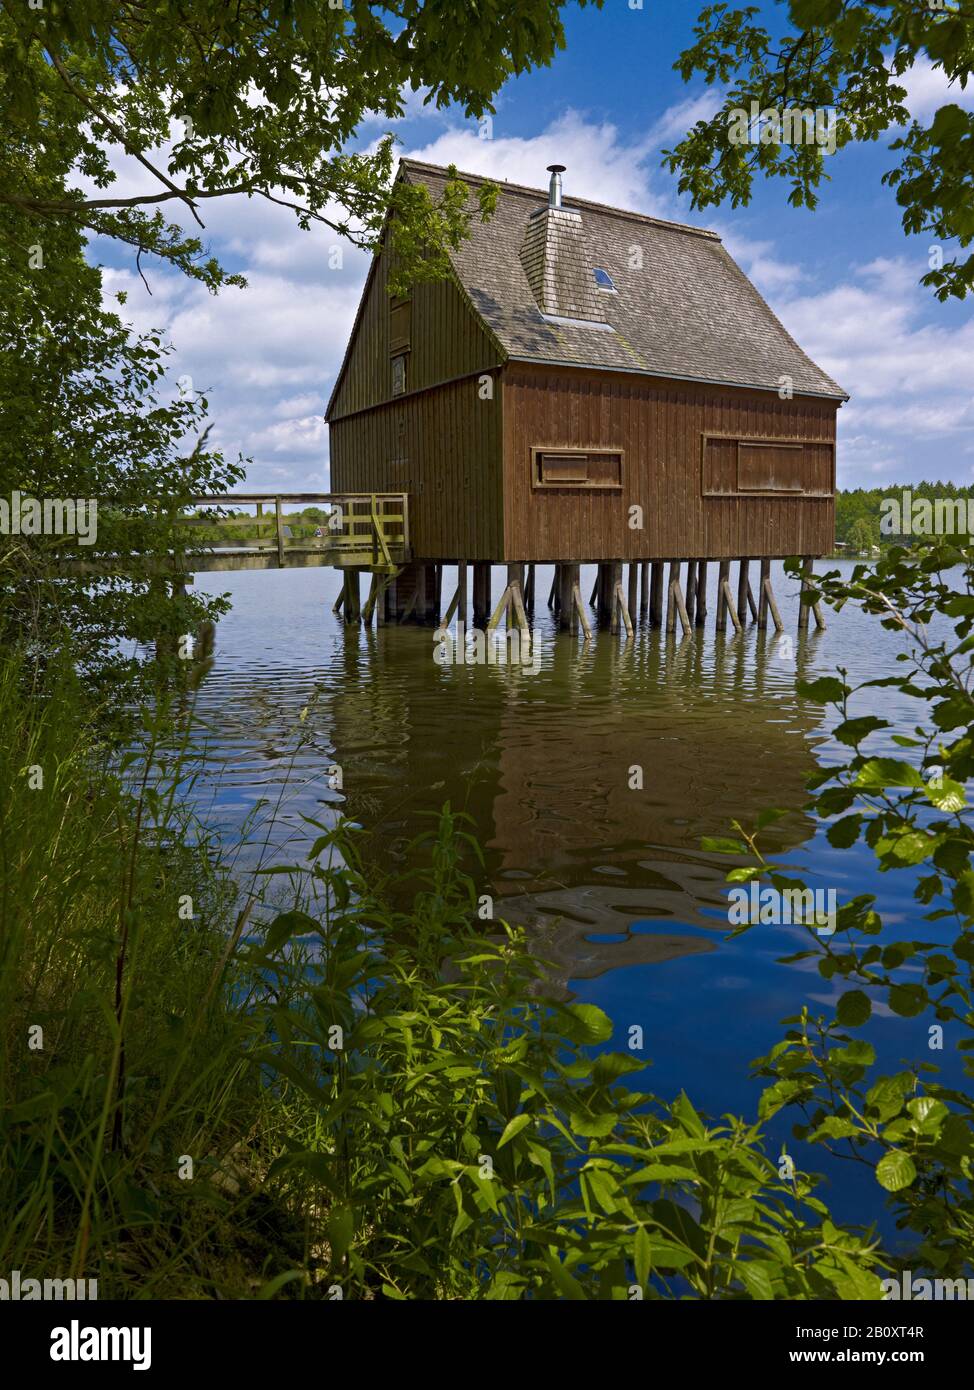 Stilt house in the house pond, Plothener Teiche, Thuringia, Germany, Stock Photo